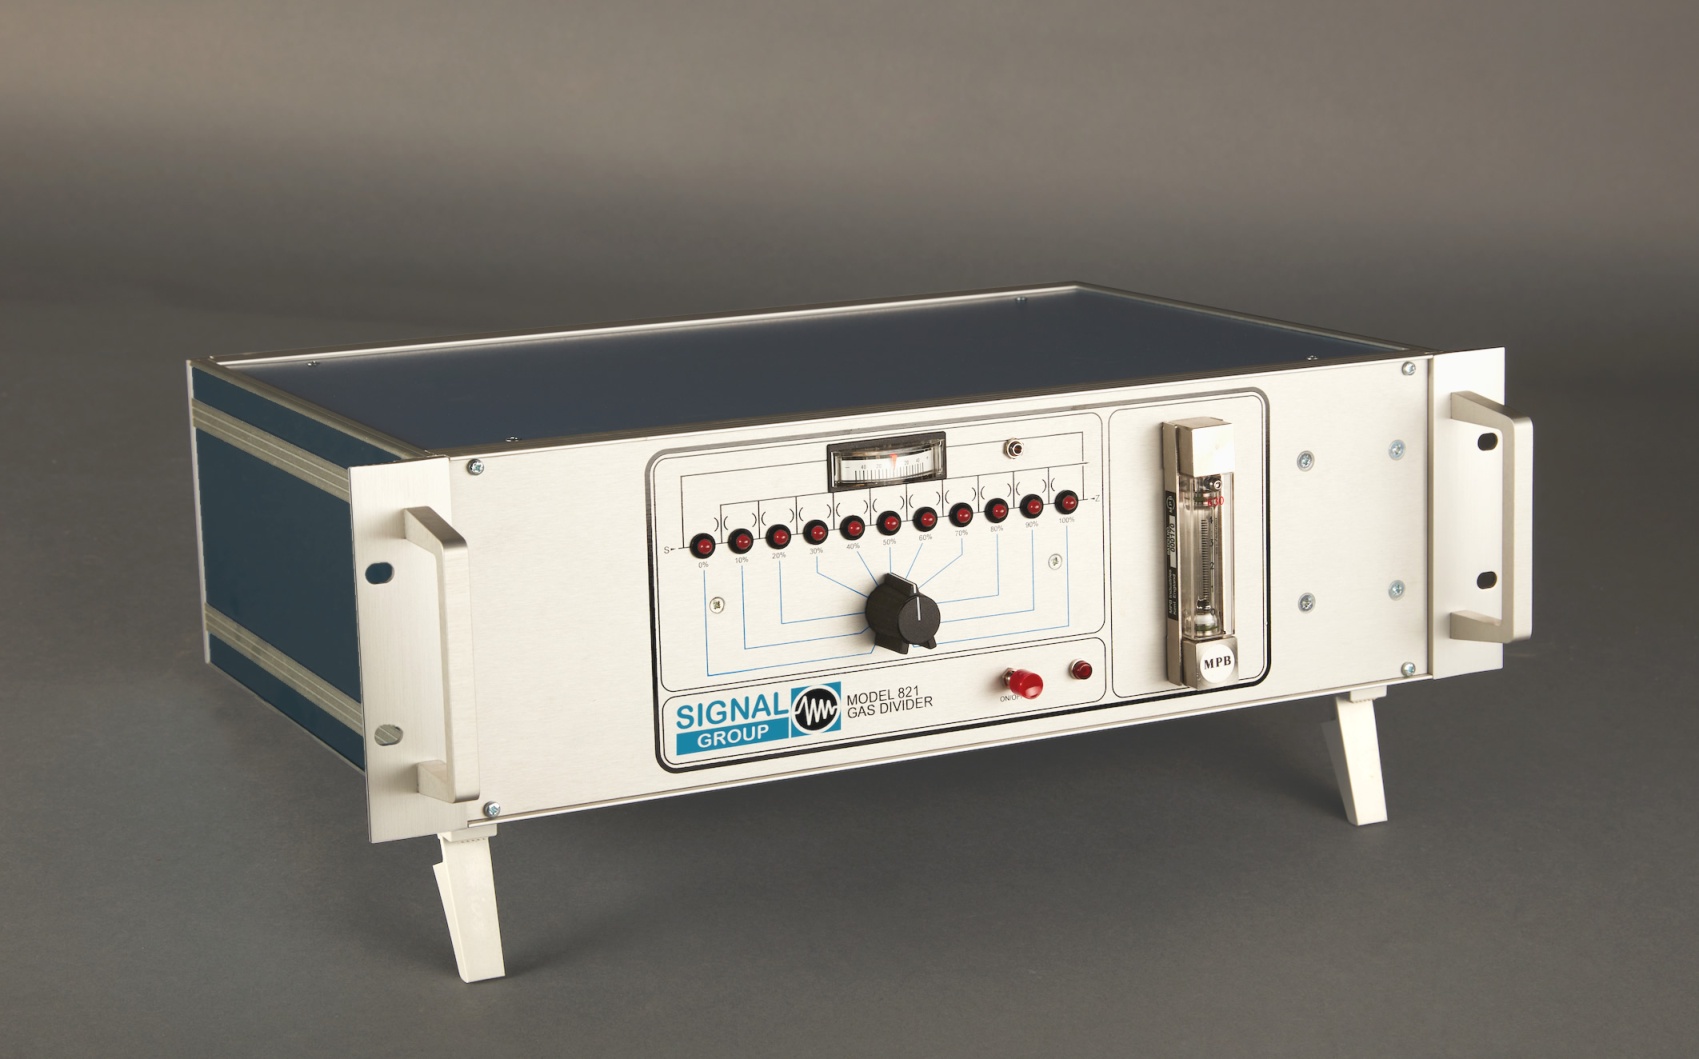 Gas dividers can check and demonstrate the performance of gas analysers